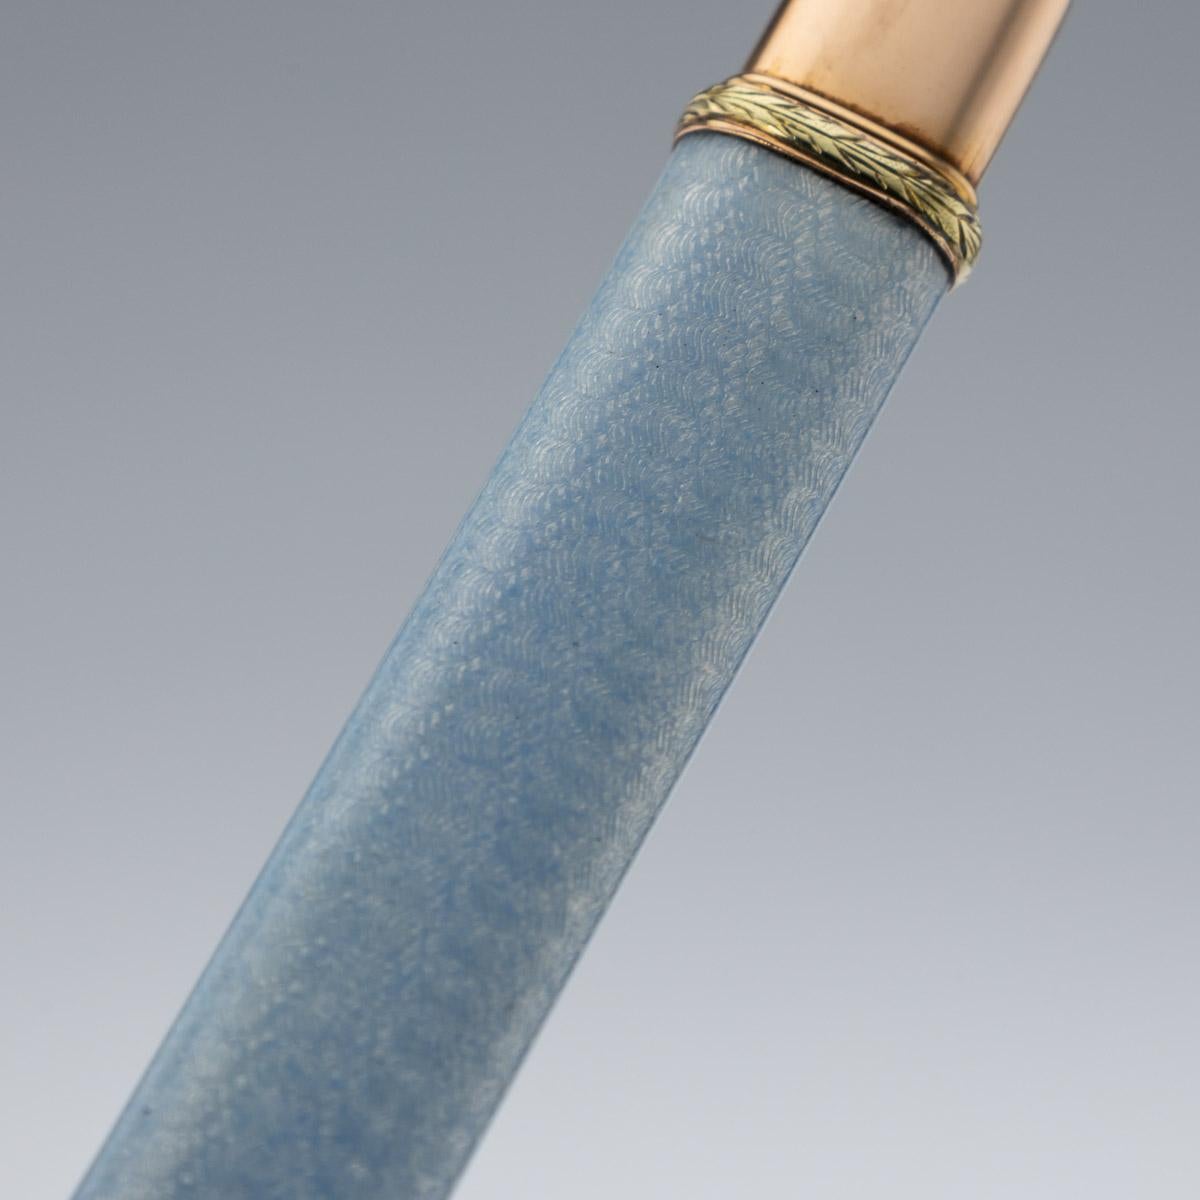 20th Century Russian Faberge Two-Colour Gold-Mounted Enamel Pencil, Adler c.1910 3